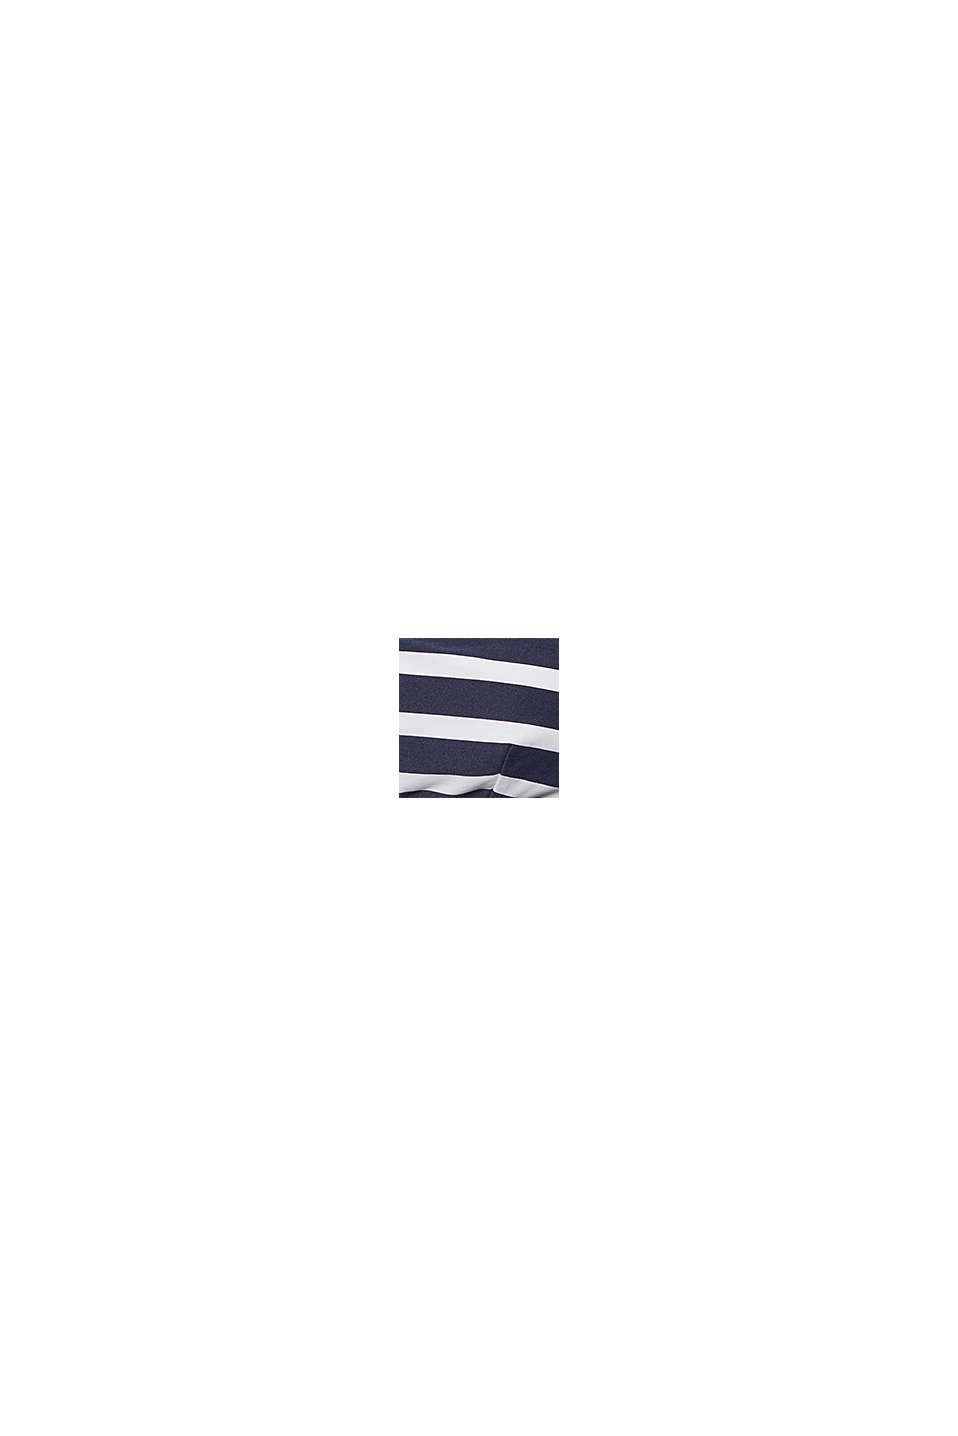 Padded crop top with stripes, NAVY, swatch